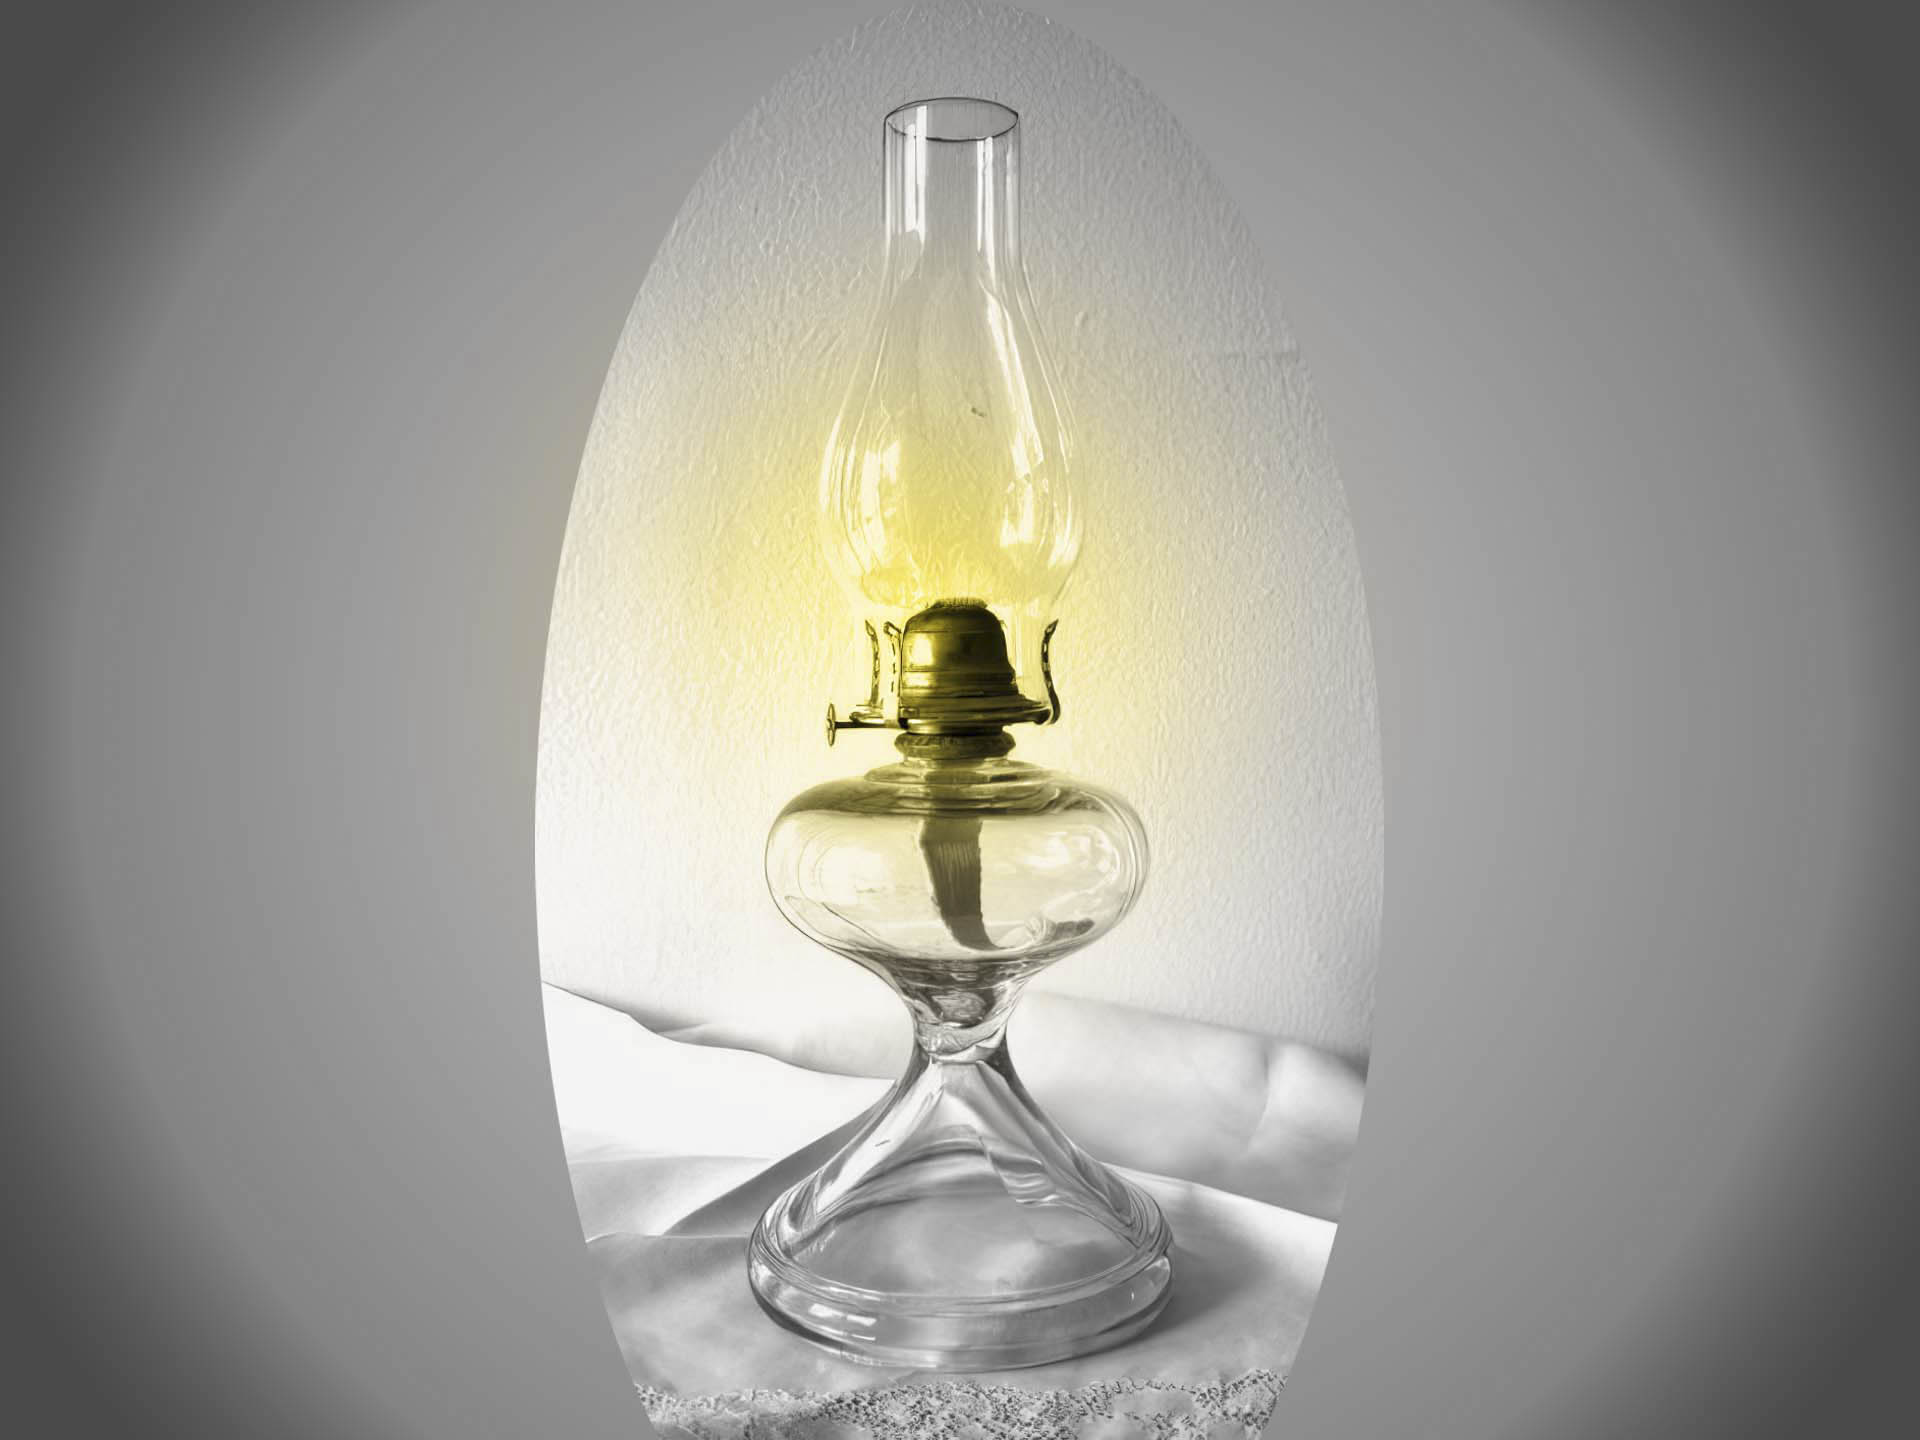 Our winter light, a version of what I (incorrectly) called the "coil-oil lamp"